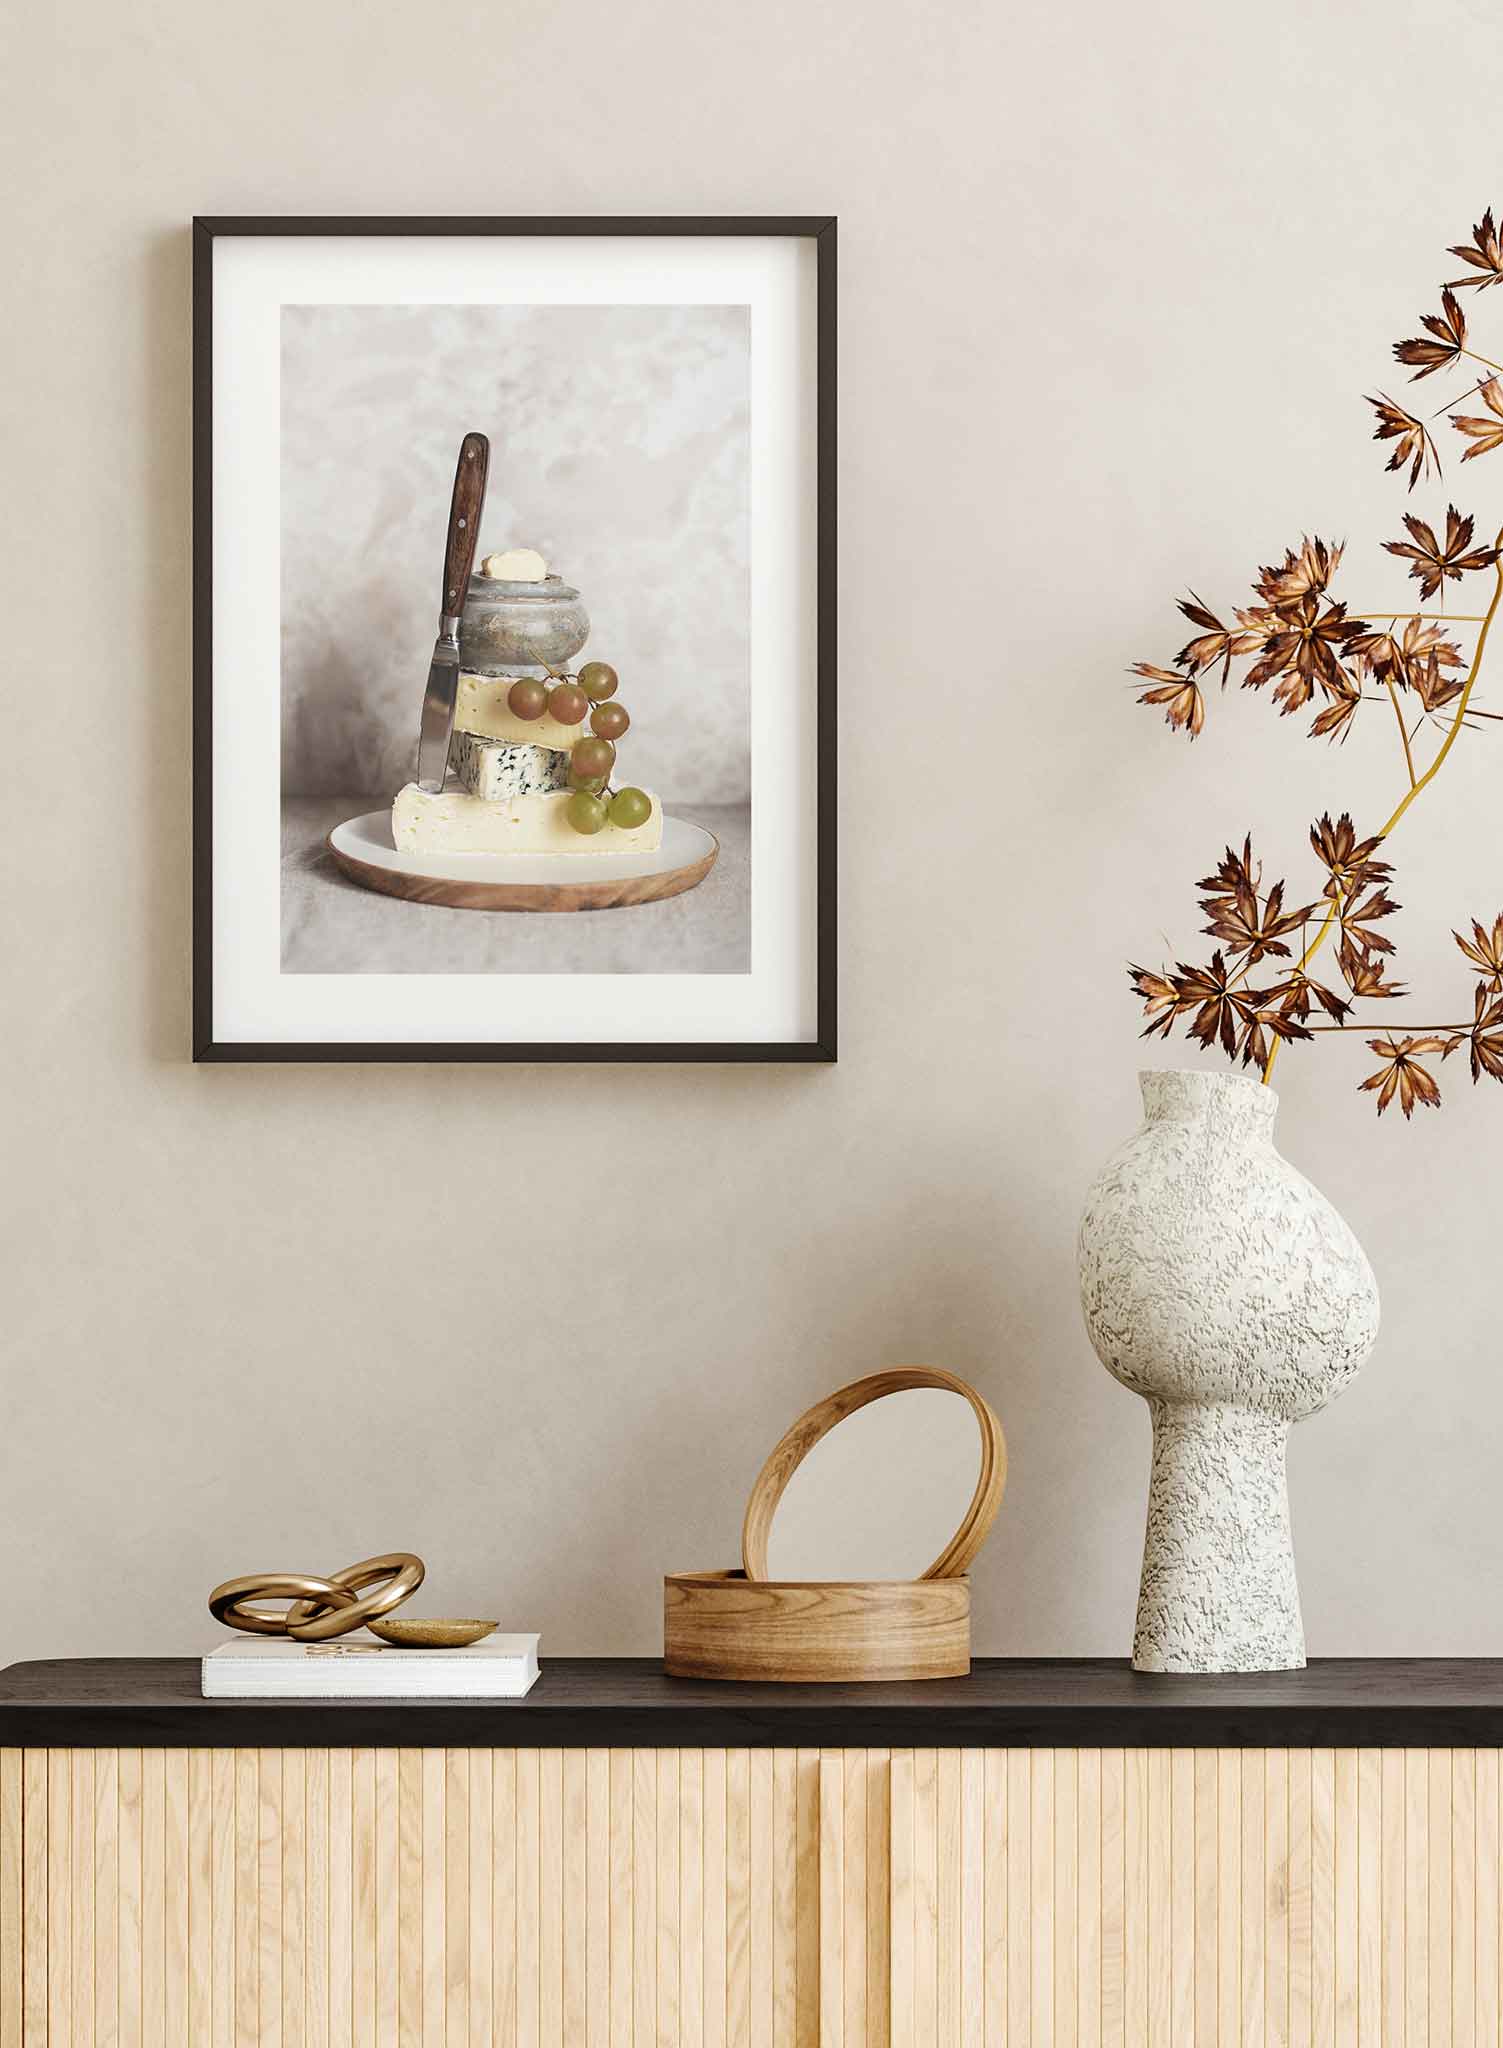 Say Cheese is a cheese still life photography poster by Opposite Wall.